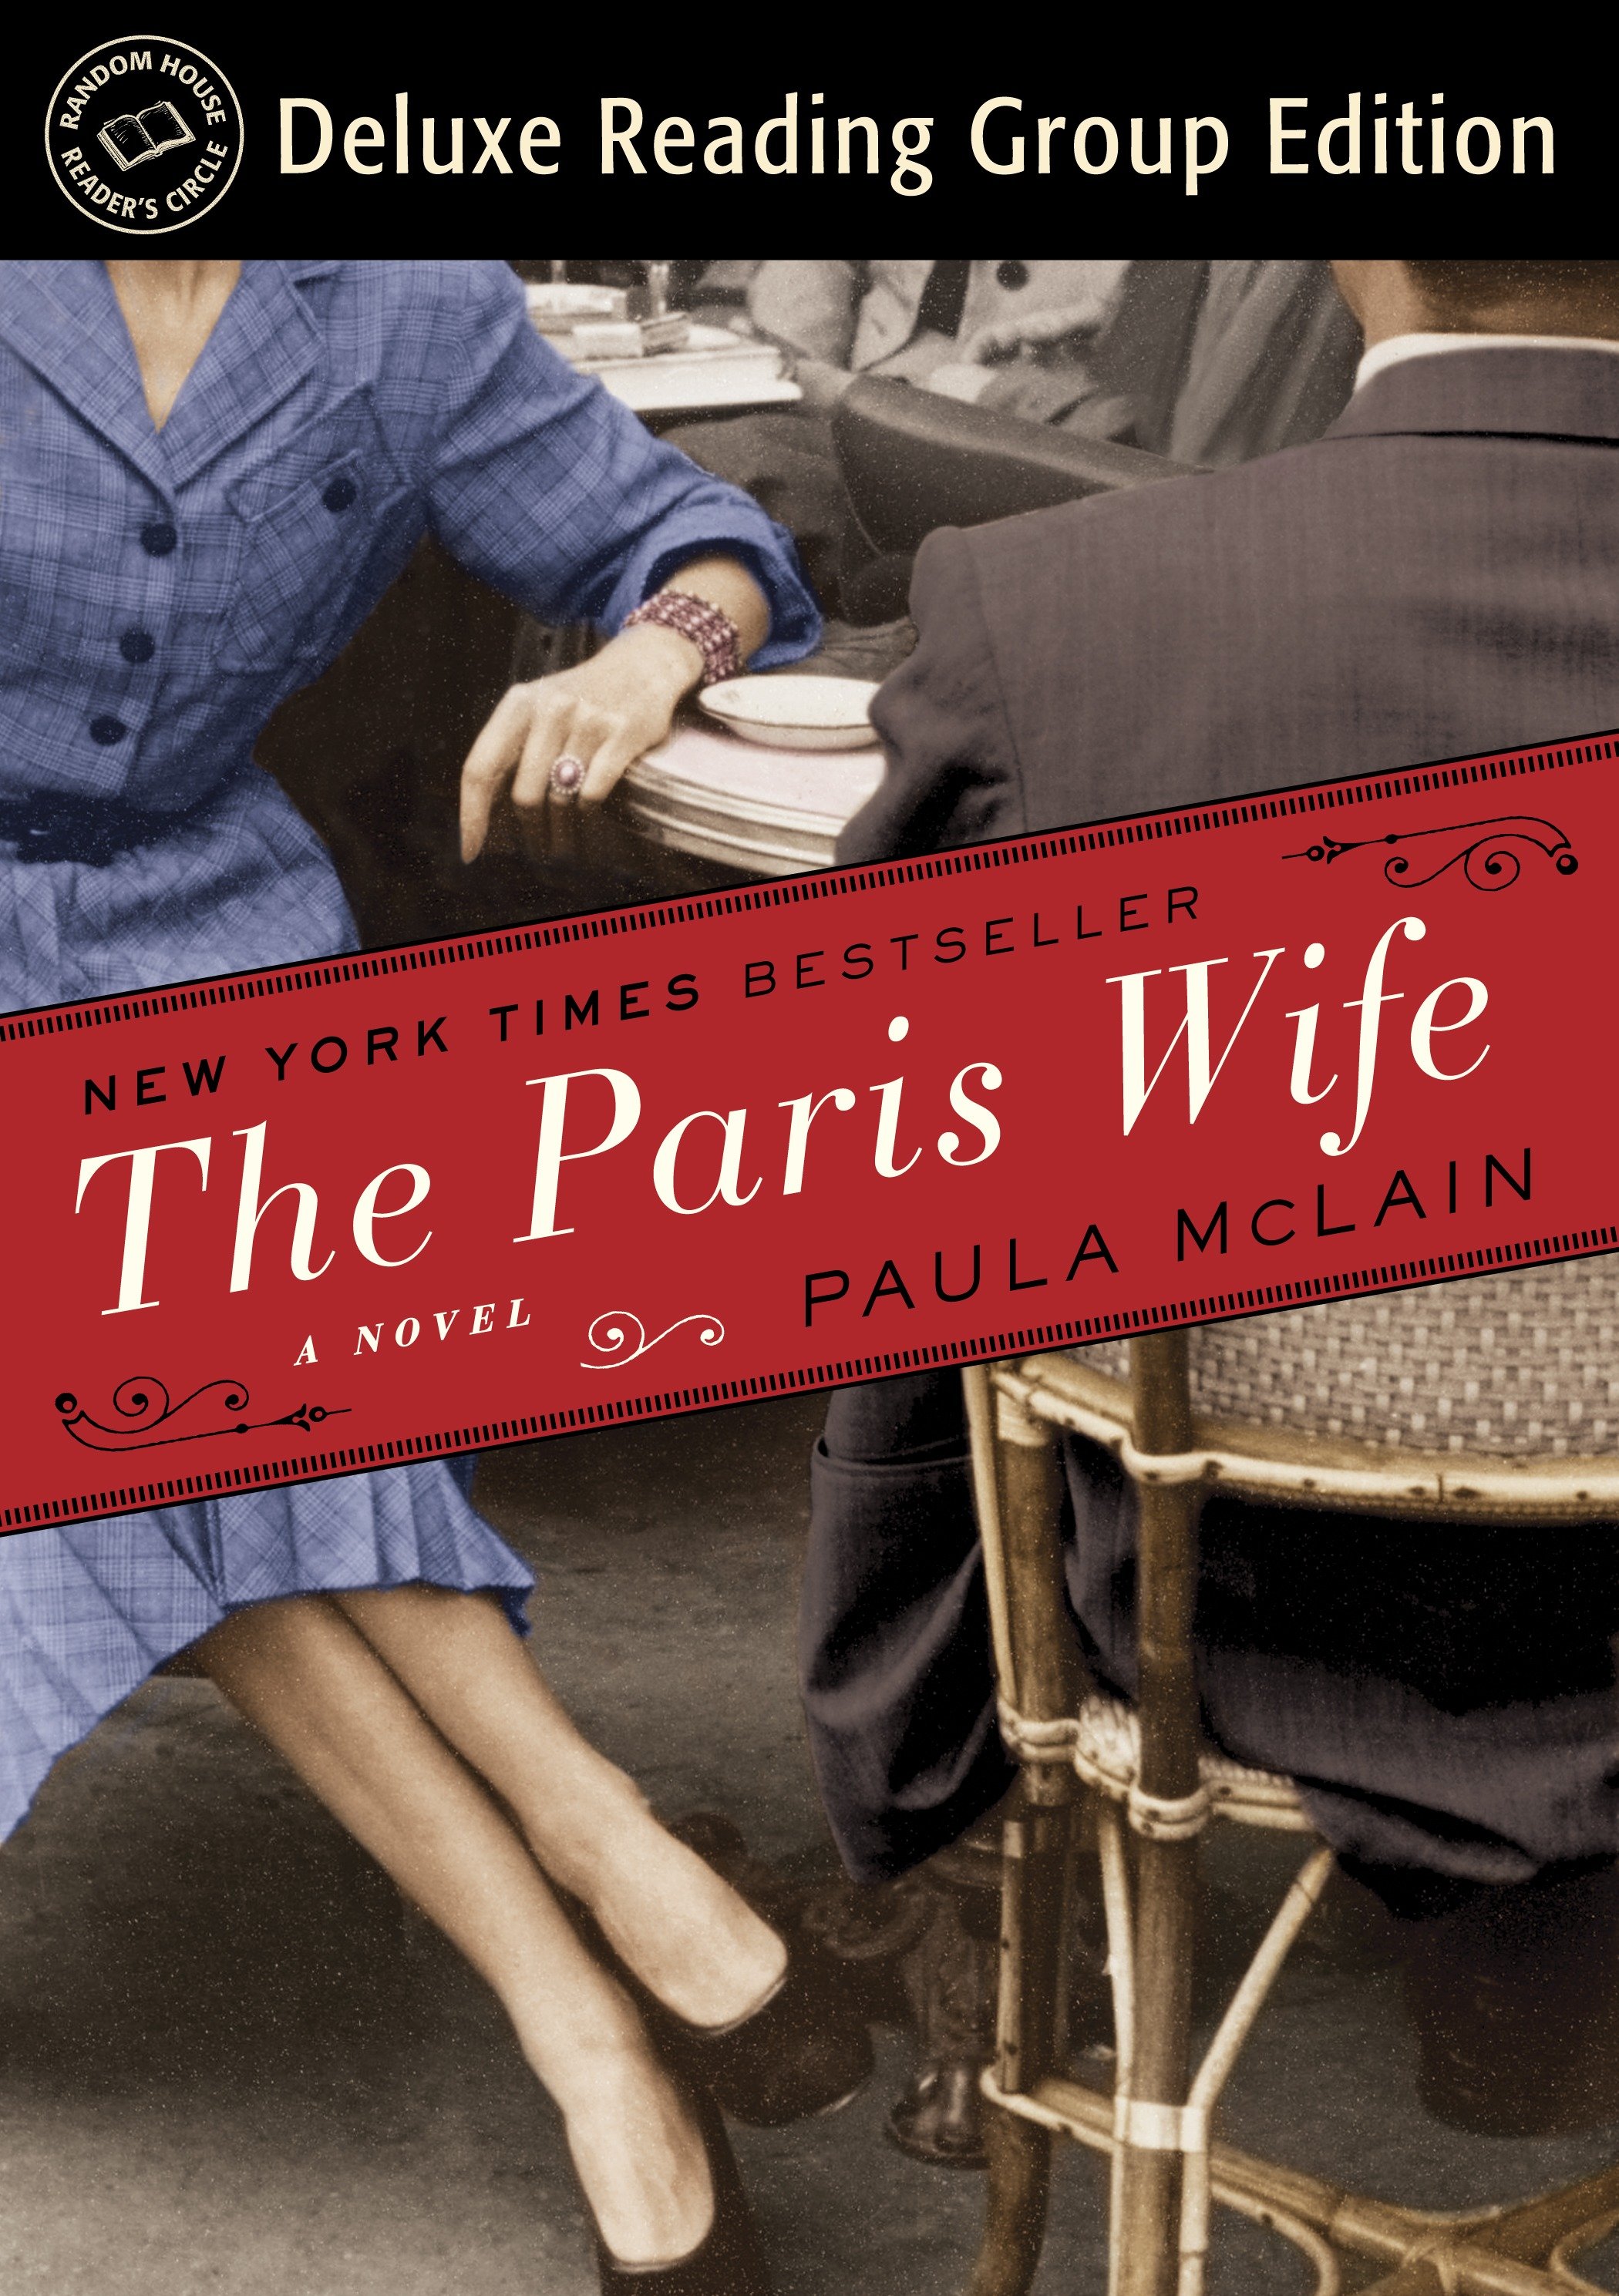 Umschlagbild für The Paris Wife (Random House Reader's Circle Deluxe Reading Group Edition) [electronic resource] : A Novel